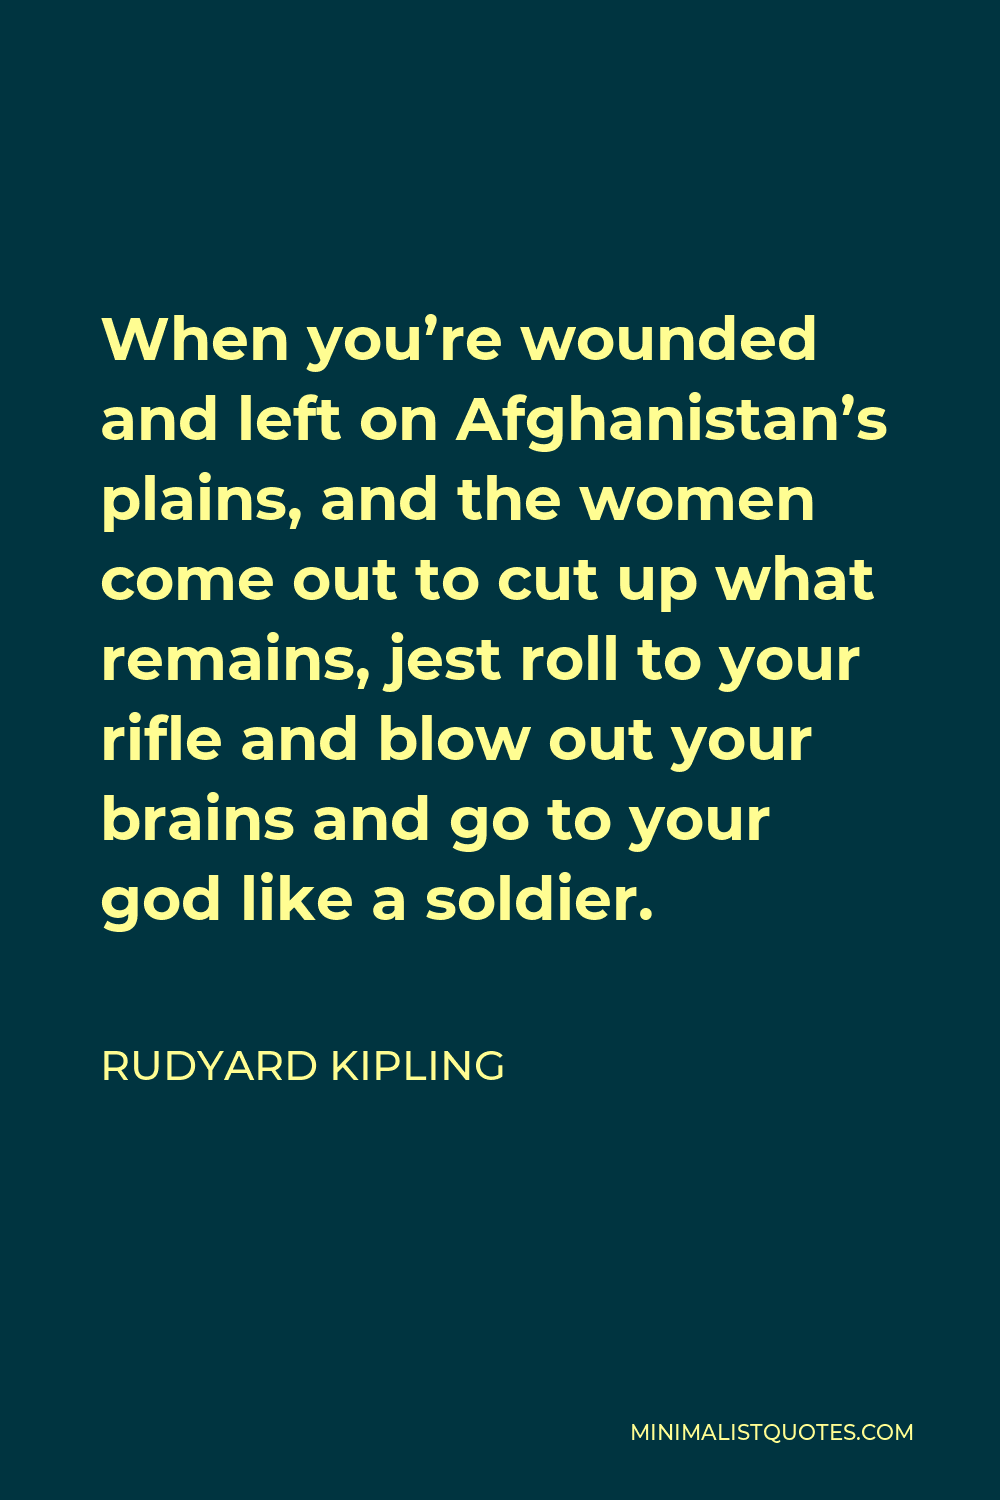 Rudyard Kipling Quote - When you’re wounded and left on Afghanistan’s plains, and the women come out to cut up what remains, jest roll to your rifle and blow out your brains and go to your god like a soldier.